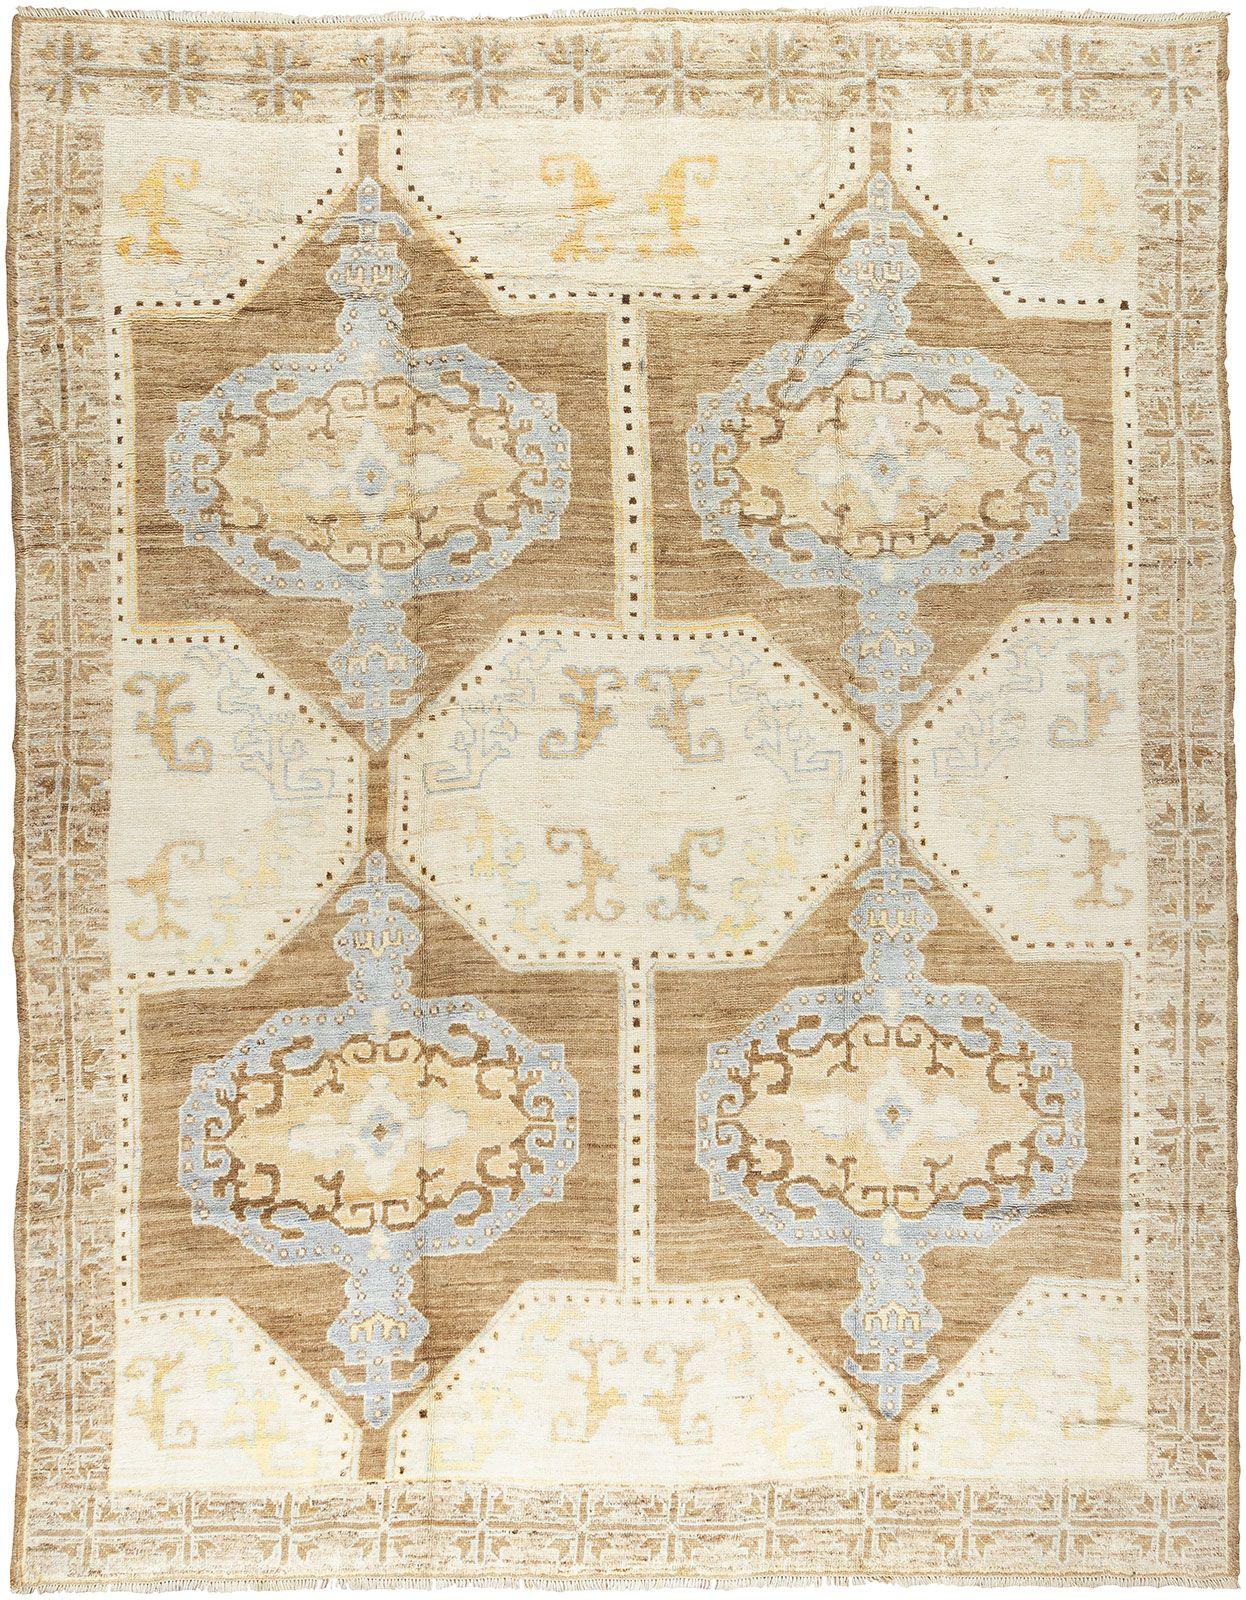 One of a Kind 21st-century Turkish rug inspired by mid-20th-century Kars carpets

rug no. j3073
size 10' 4